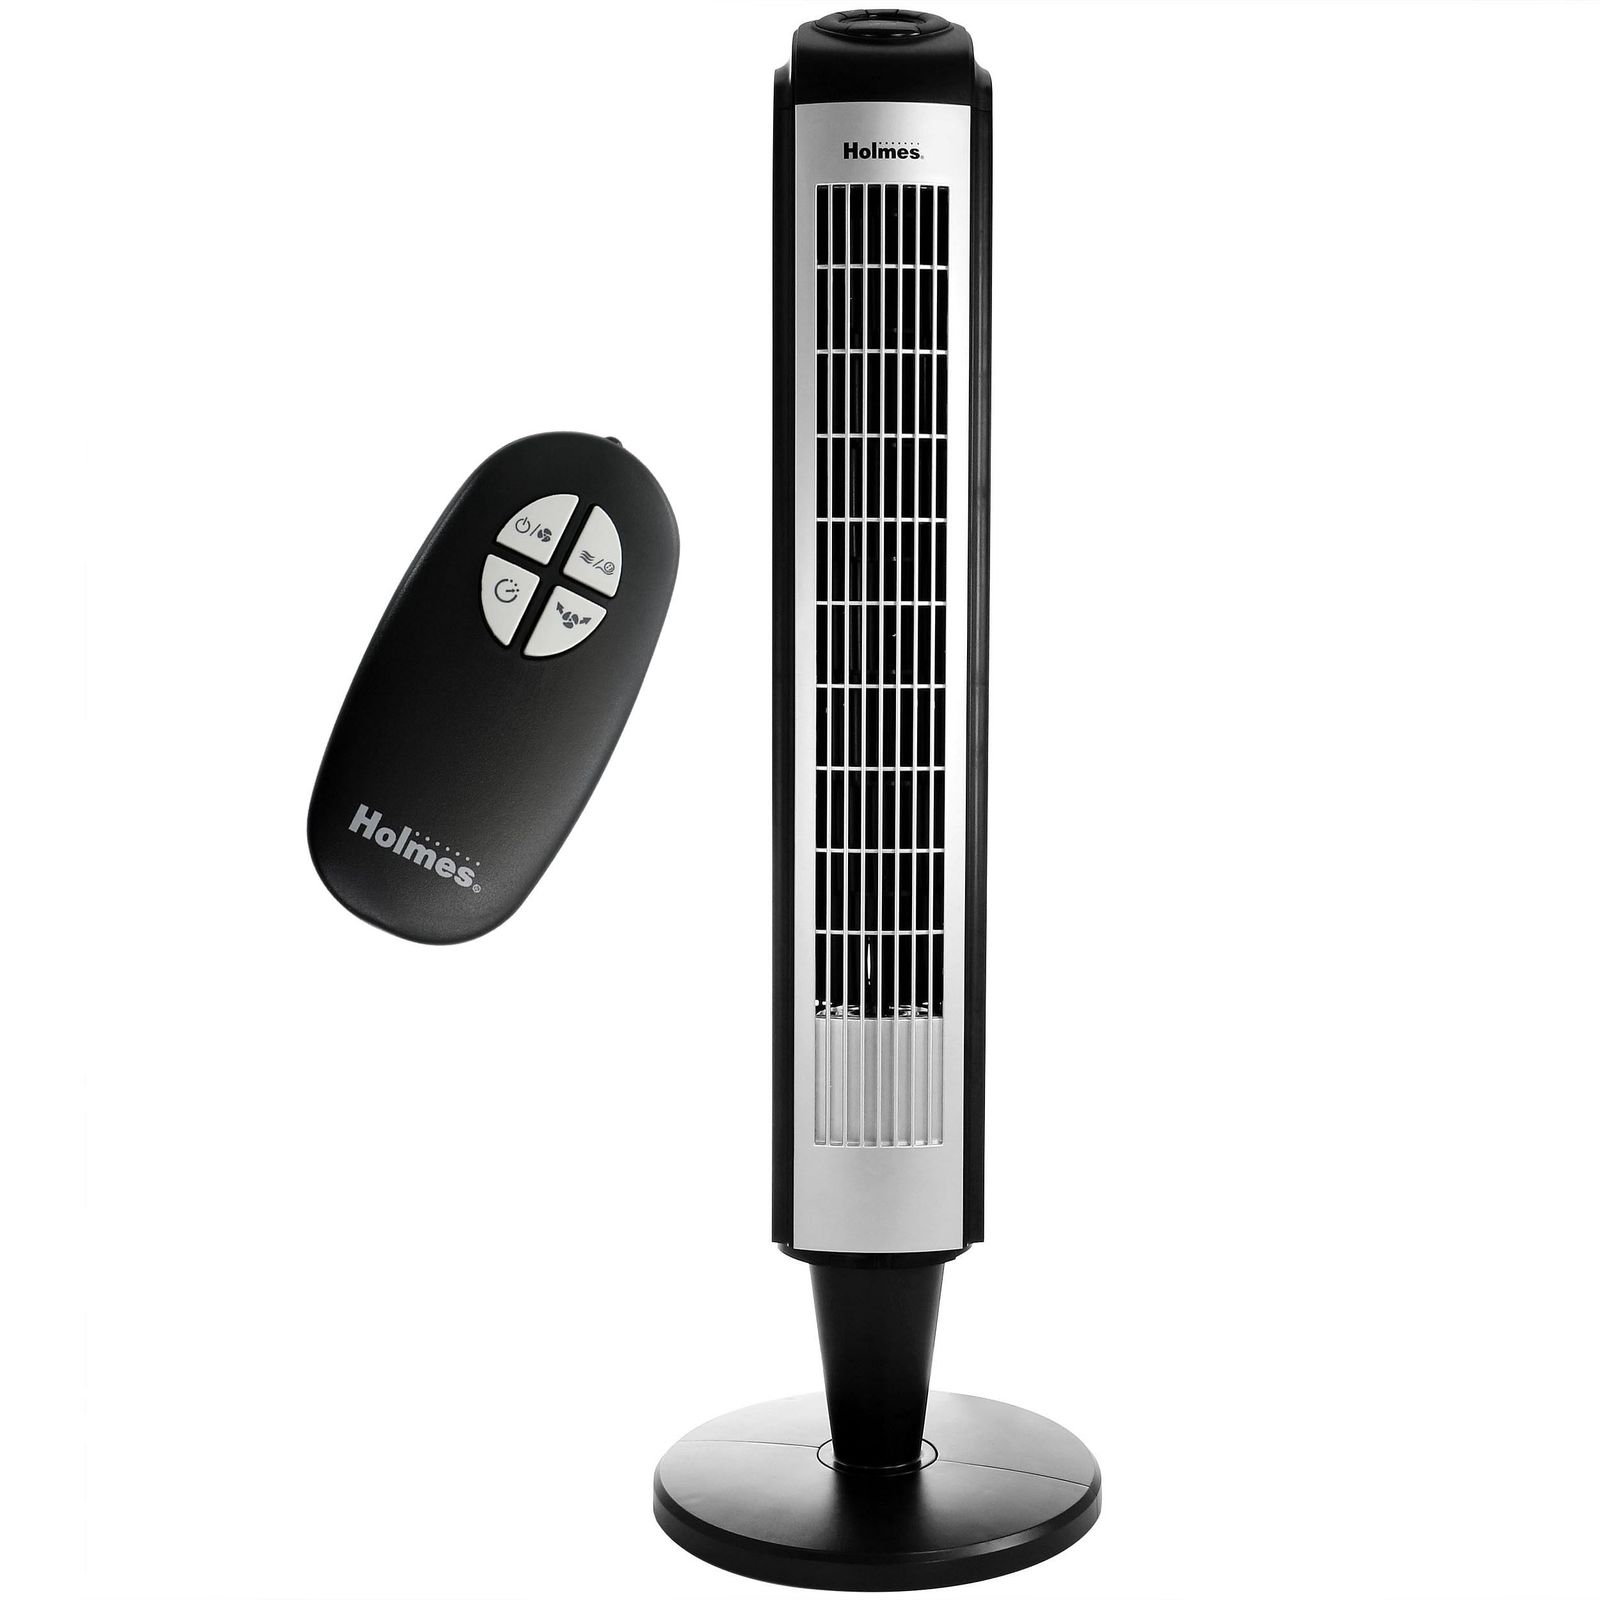 Holmes 36 Inch Oscillating Tower Fan with Remote Control in Black and Silver - $86.61